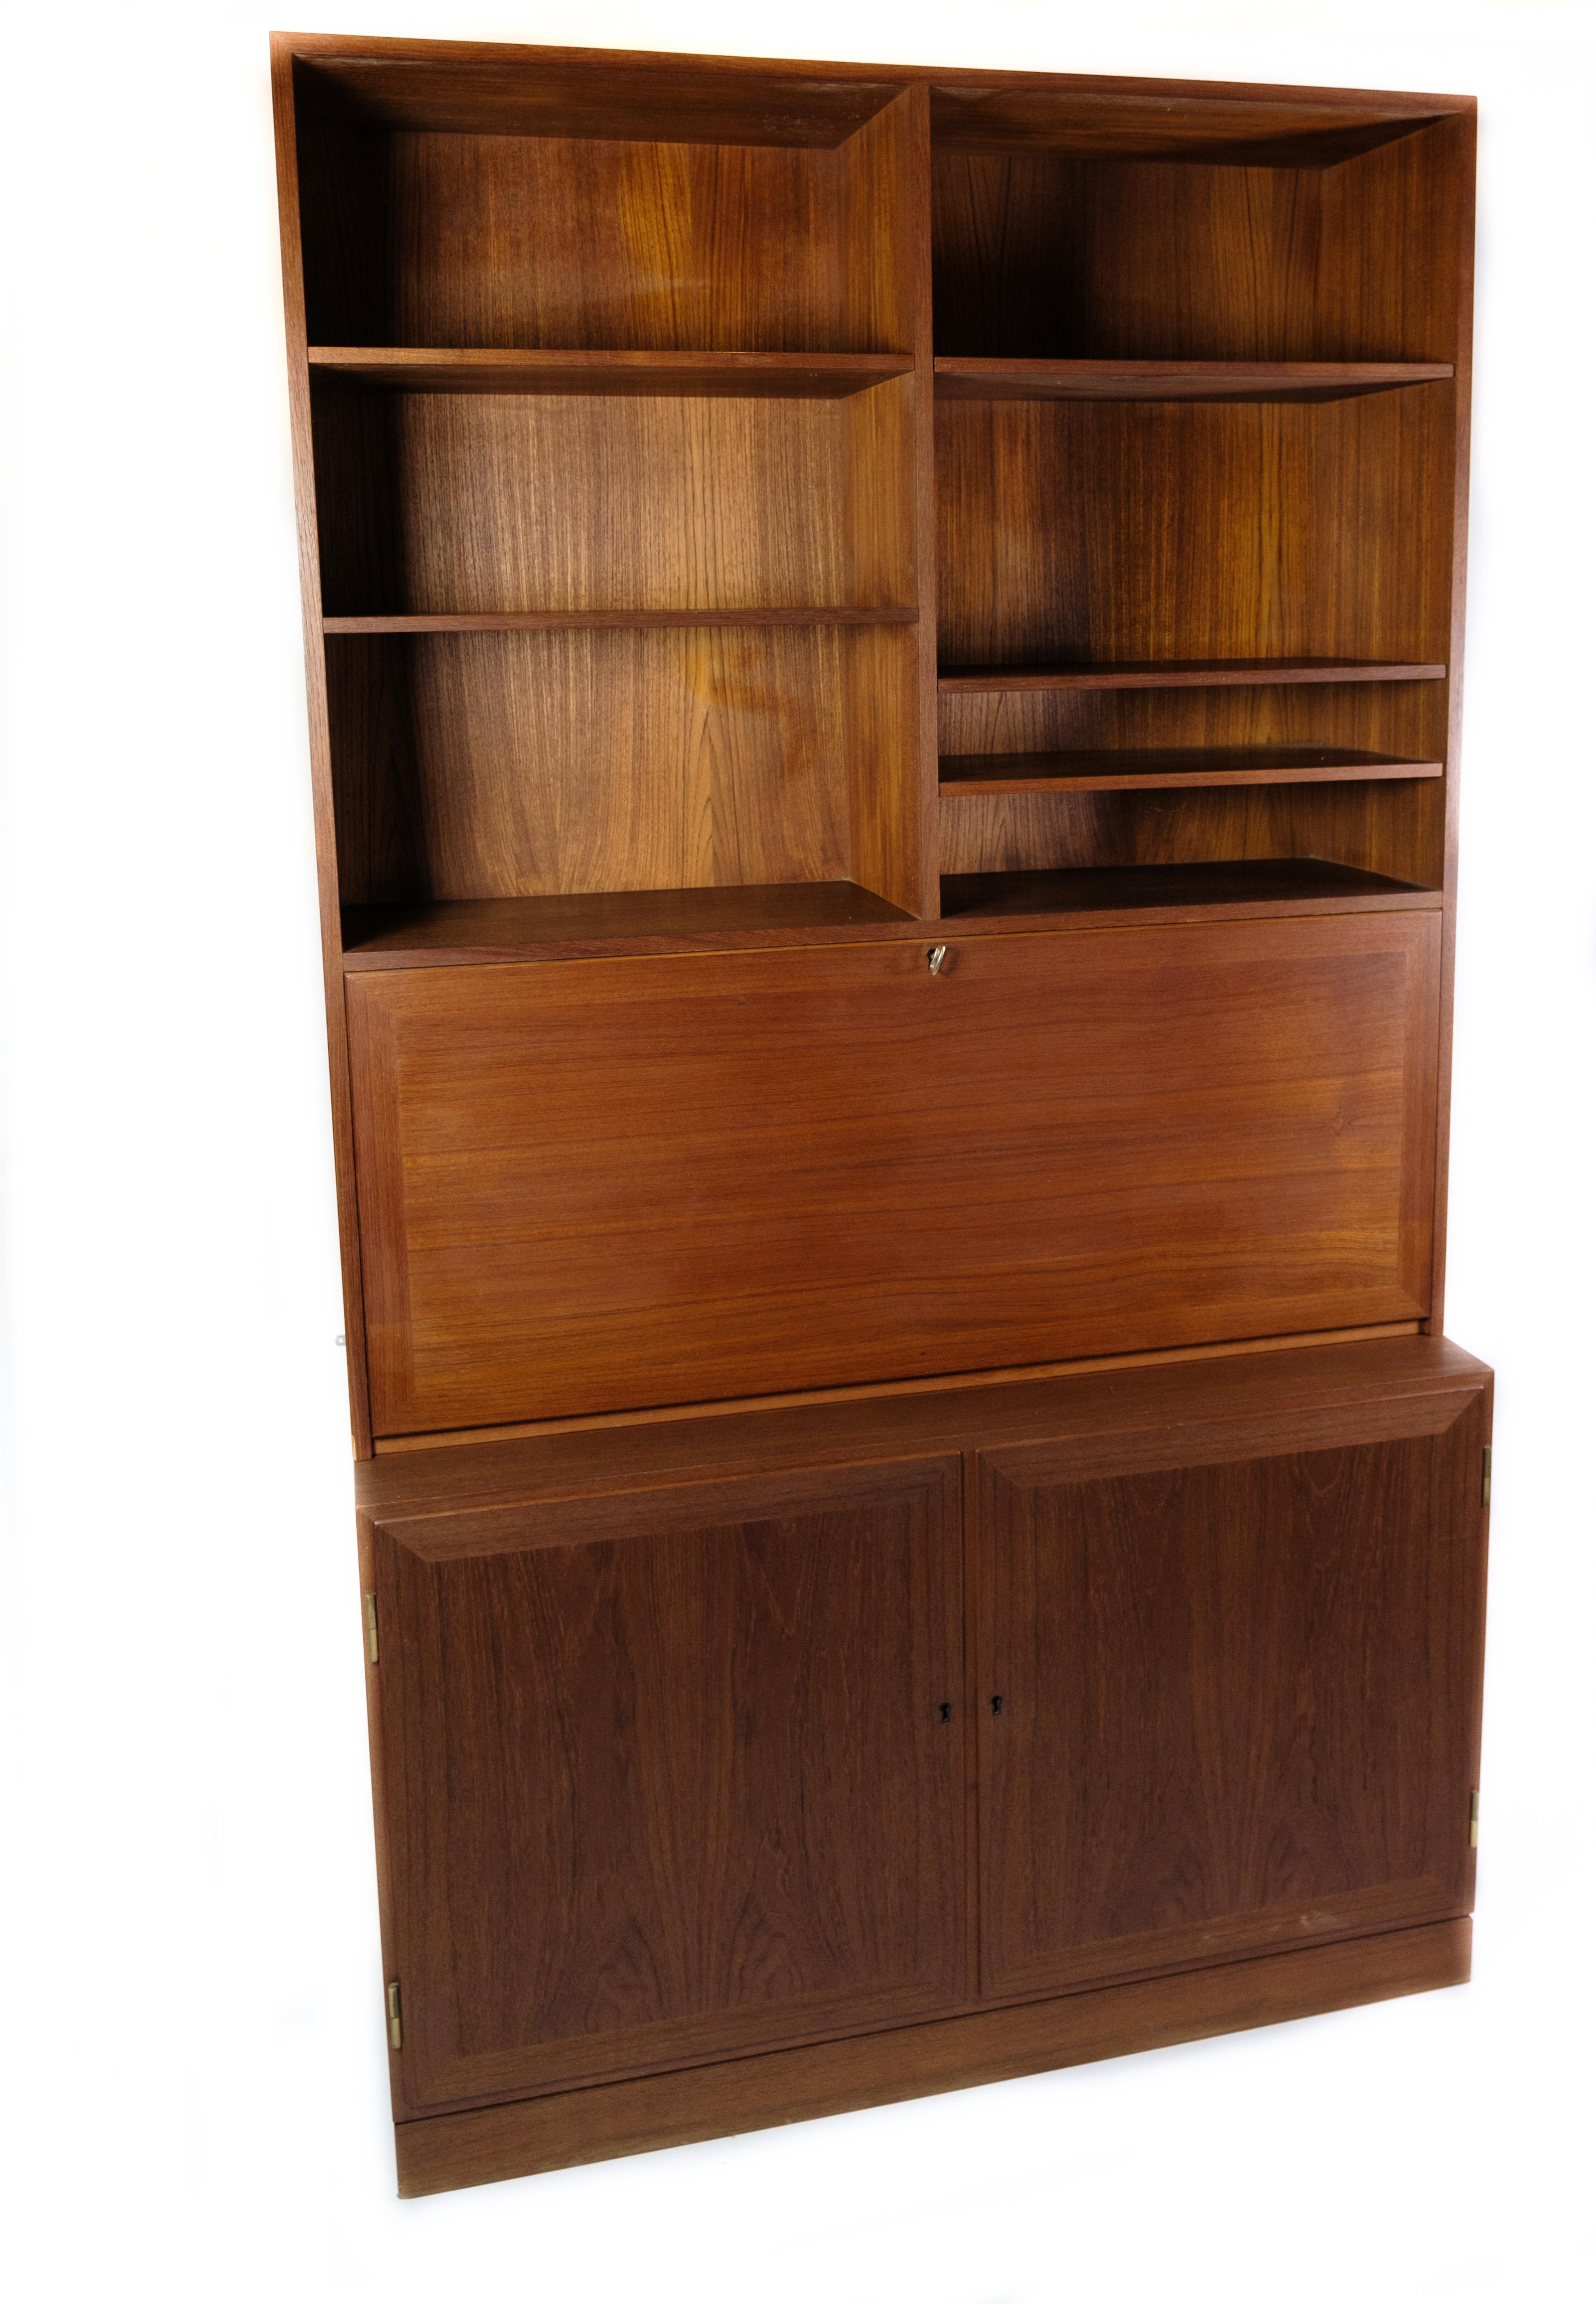 Made of teak and dating from the 1960s, this impressive bookcase with secretary/desk is a masterpiece of functionality and aesthetics. With its beautiful teak wood and characteristic design, this bookcase exudes a timeless elegance and simplicity